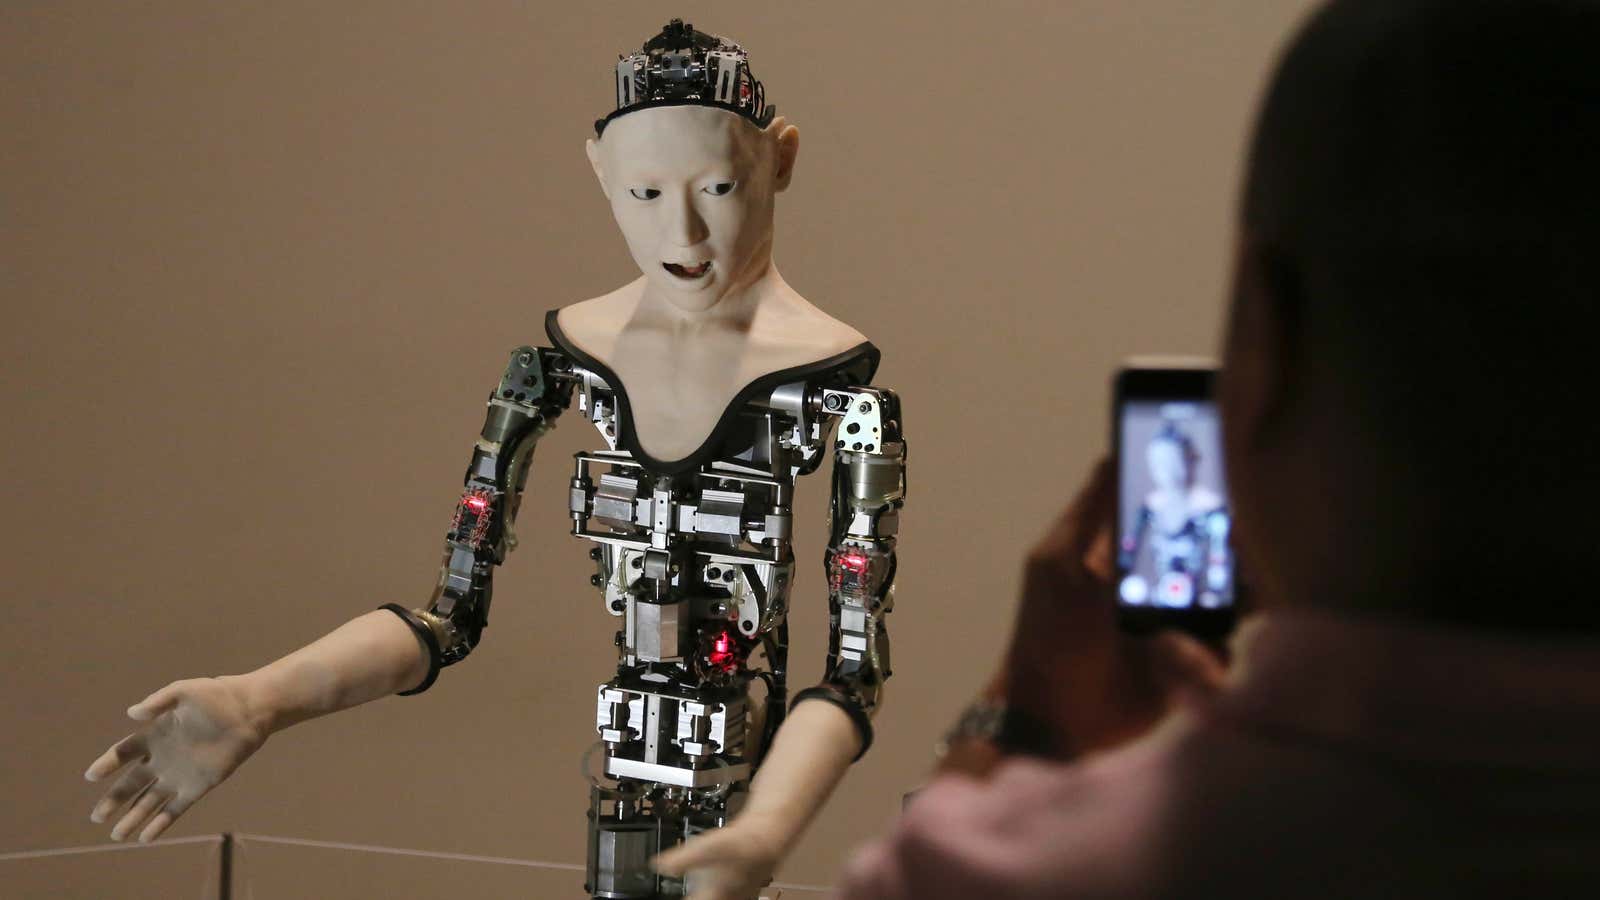 Humanoid robot “Alter” is displays at the National Museum of Emerging Science and Innovation in Tokyo, Monday, Aug. 1, 2016. (AP Photo/Koji Sasahara)